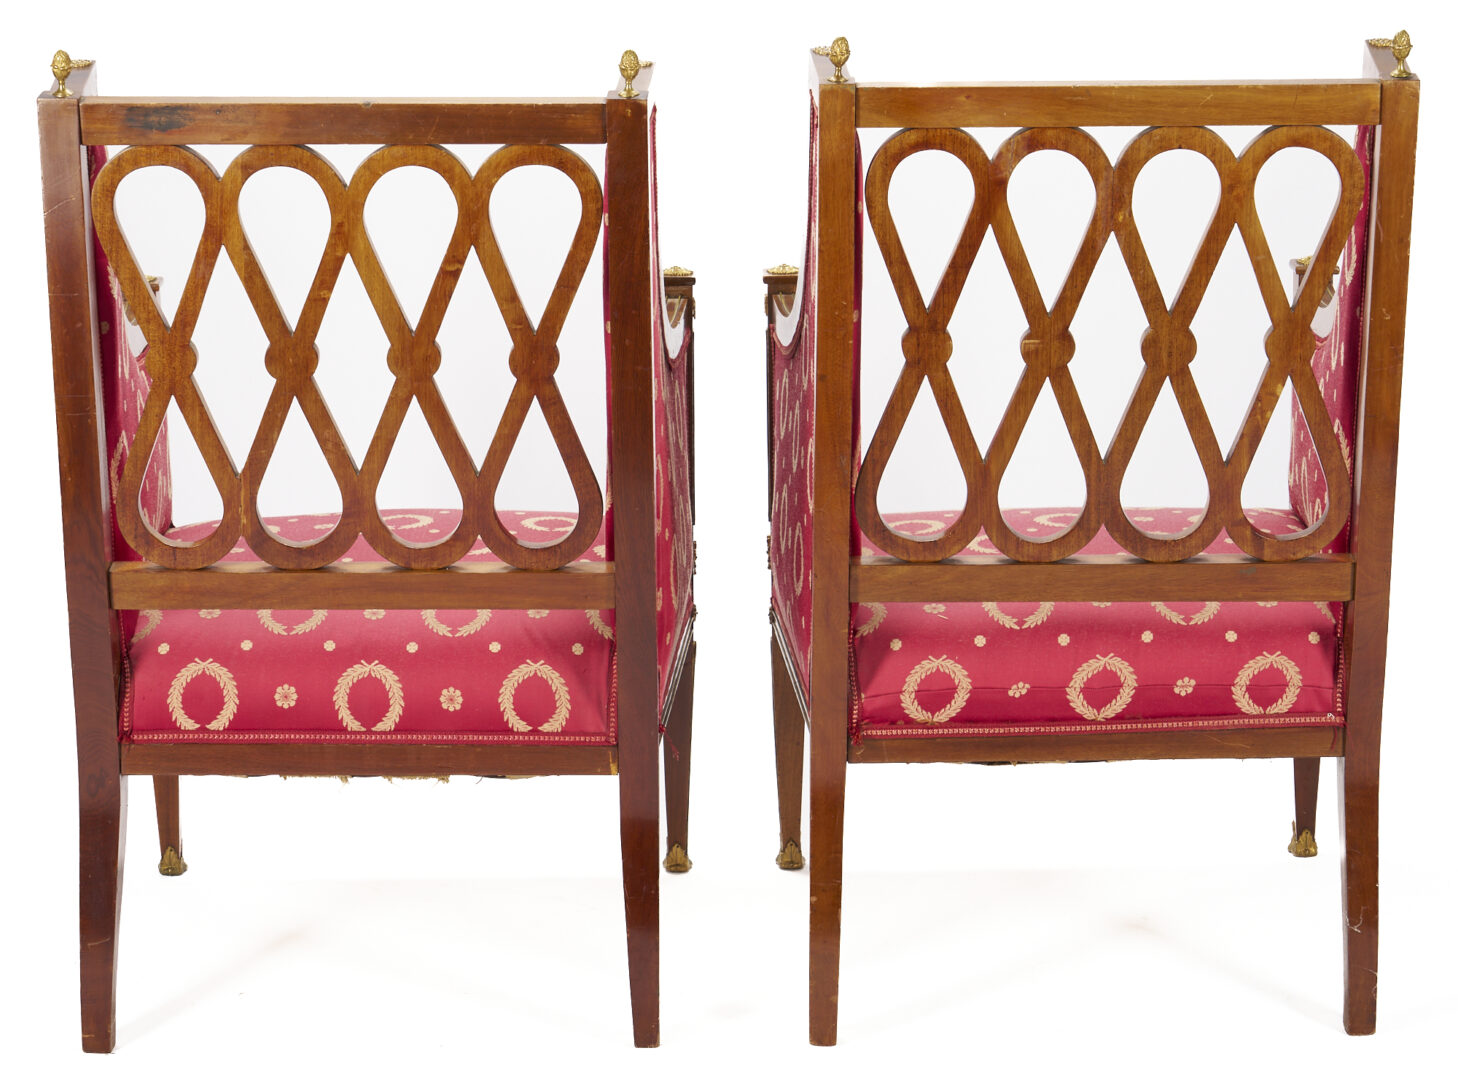 Lot 366: Pair of French Neoclassical Style Baltic BergÃÂ©re Chairs